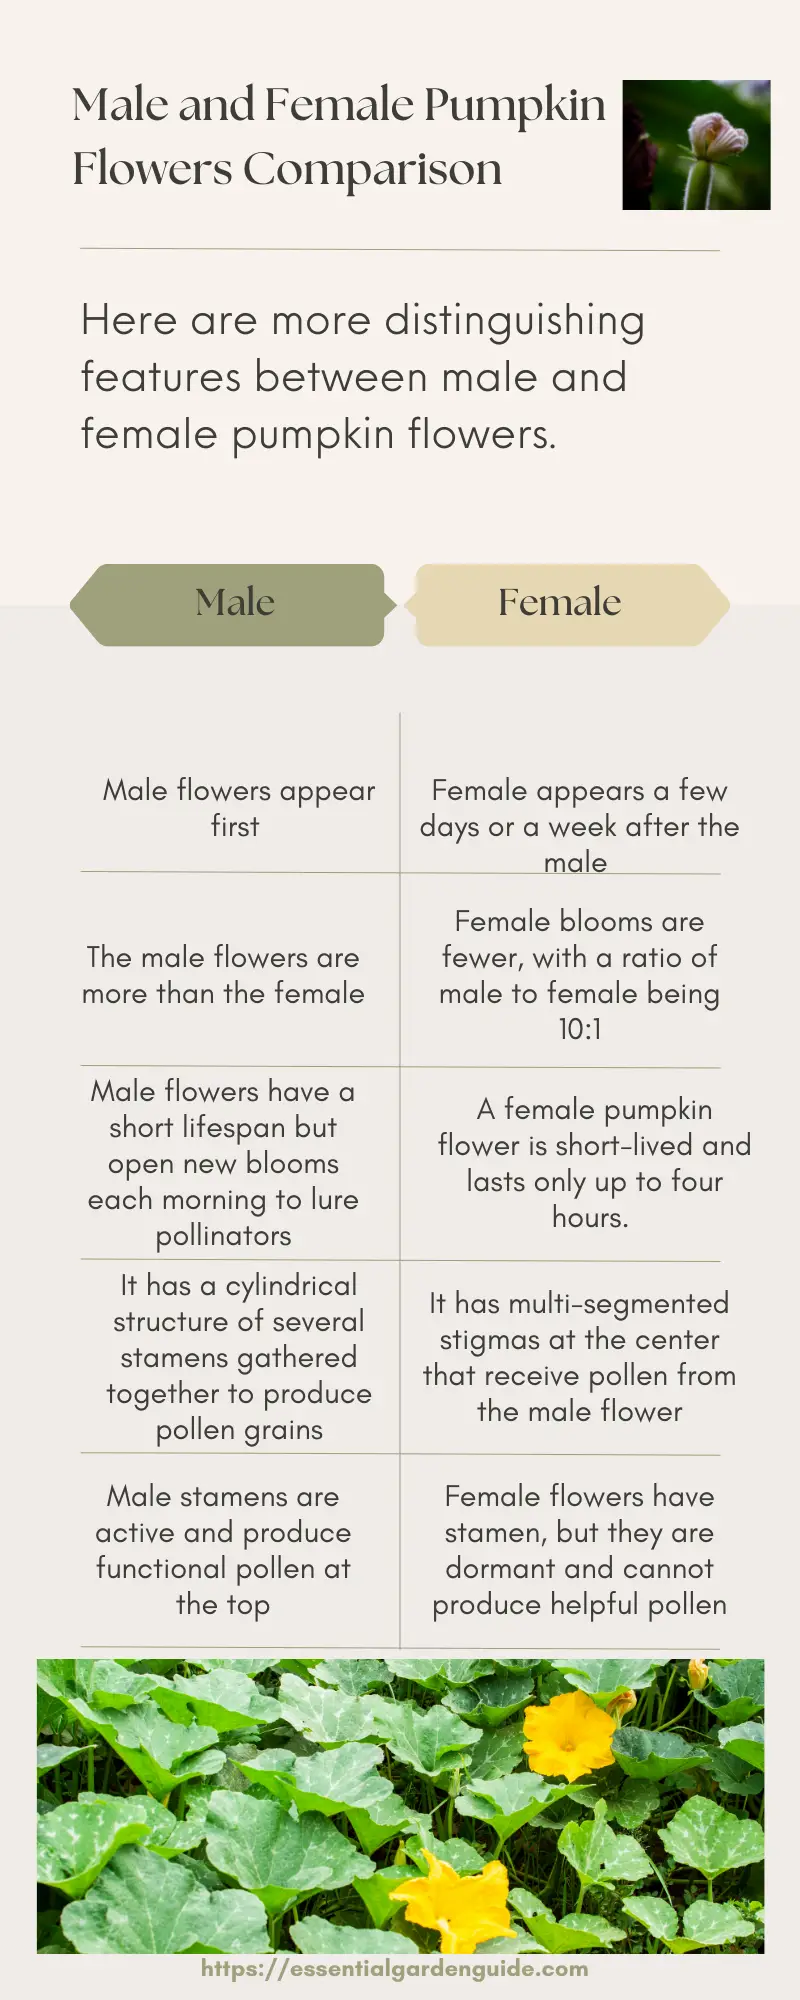 Compare male and female pumpkin flowers